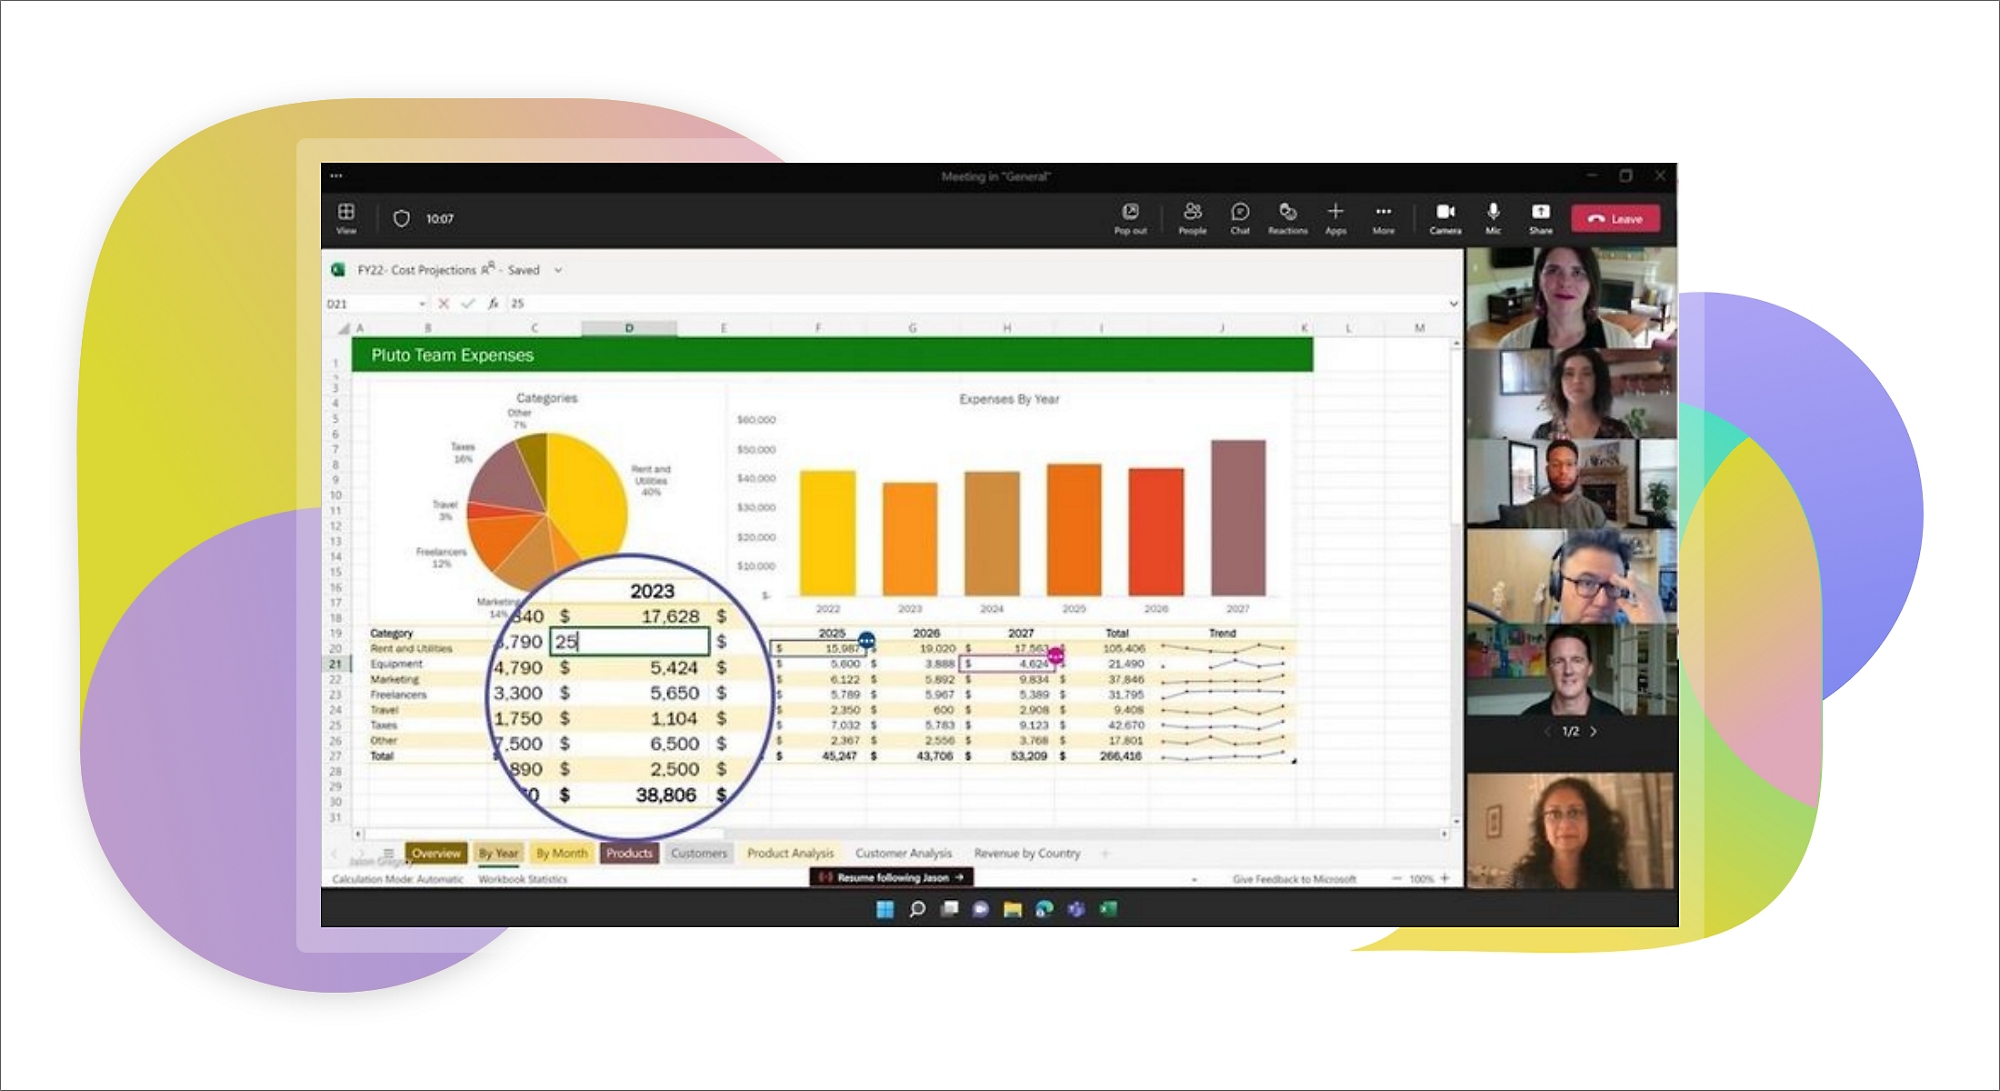 People in a Teams video call while an Excel sheet is being shared and edited in real-time through the call